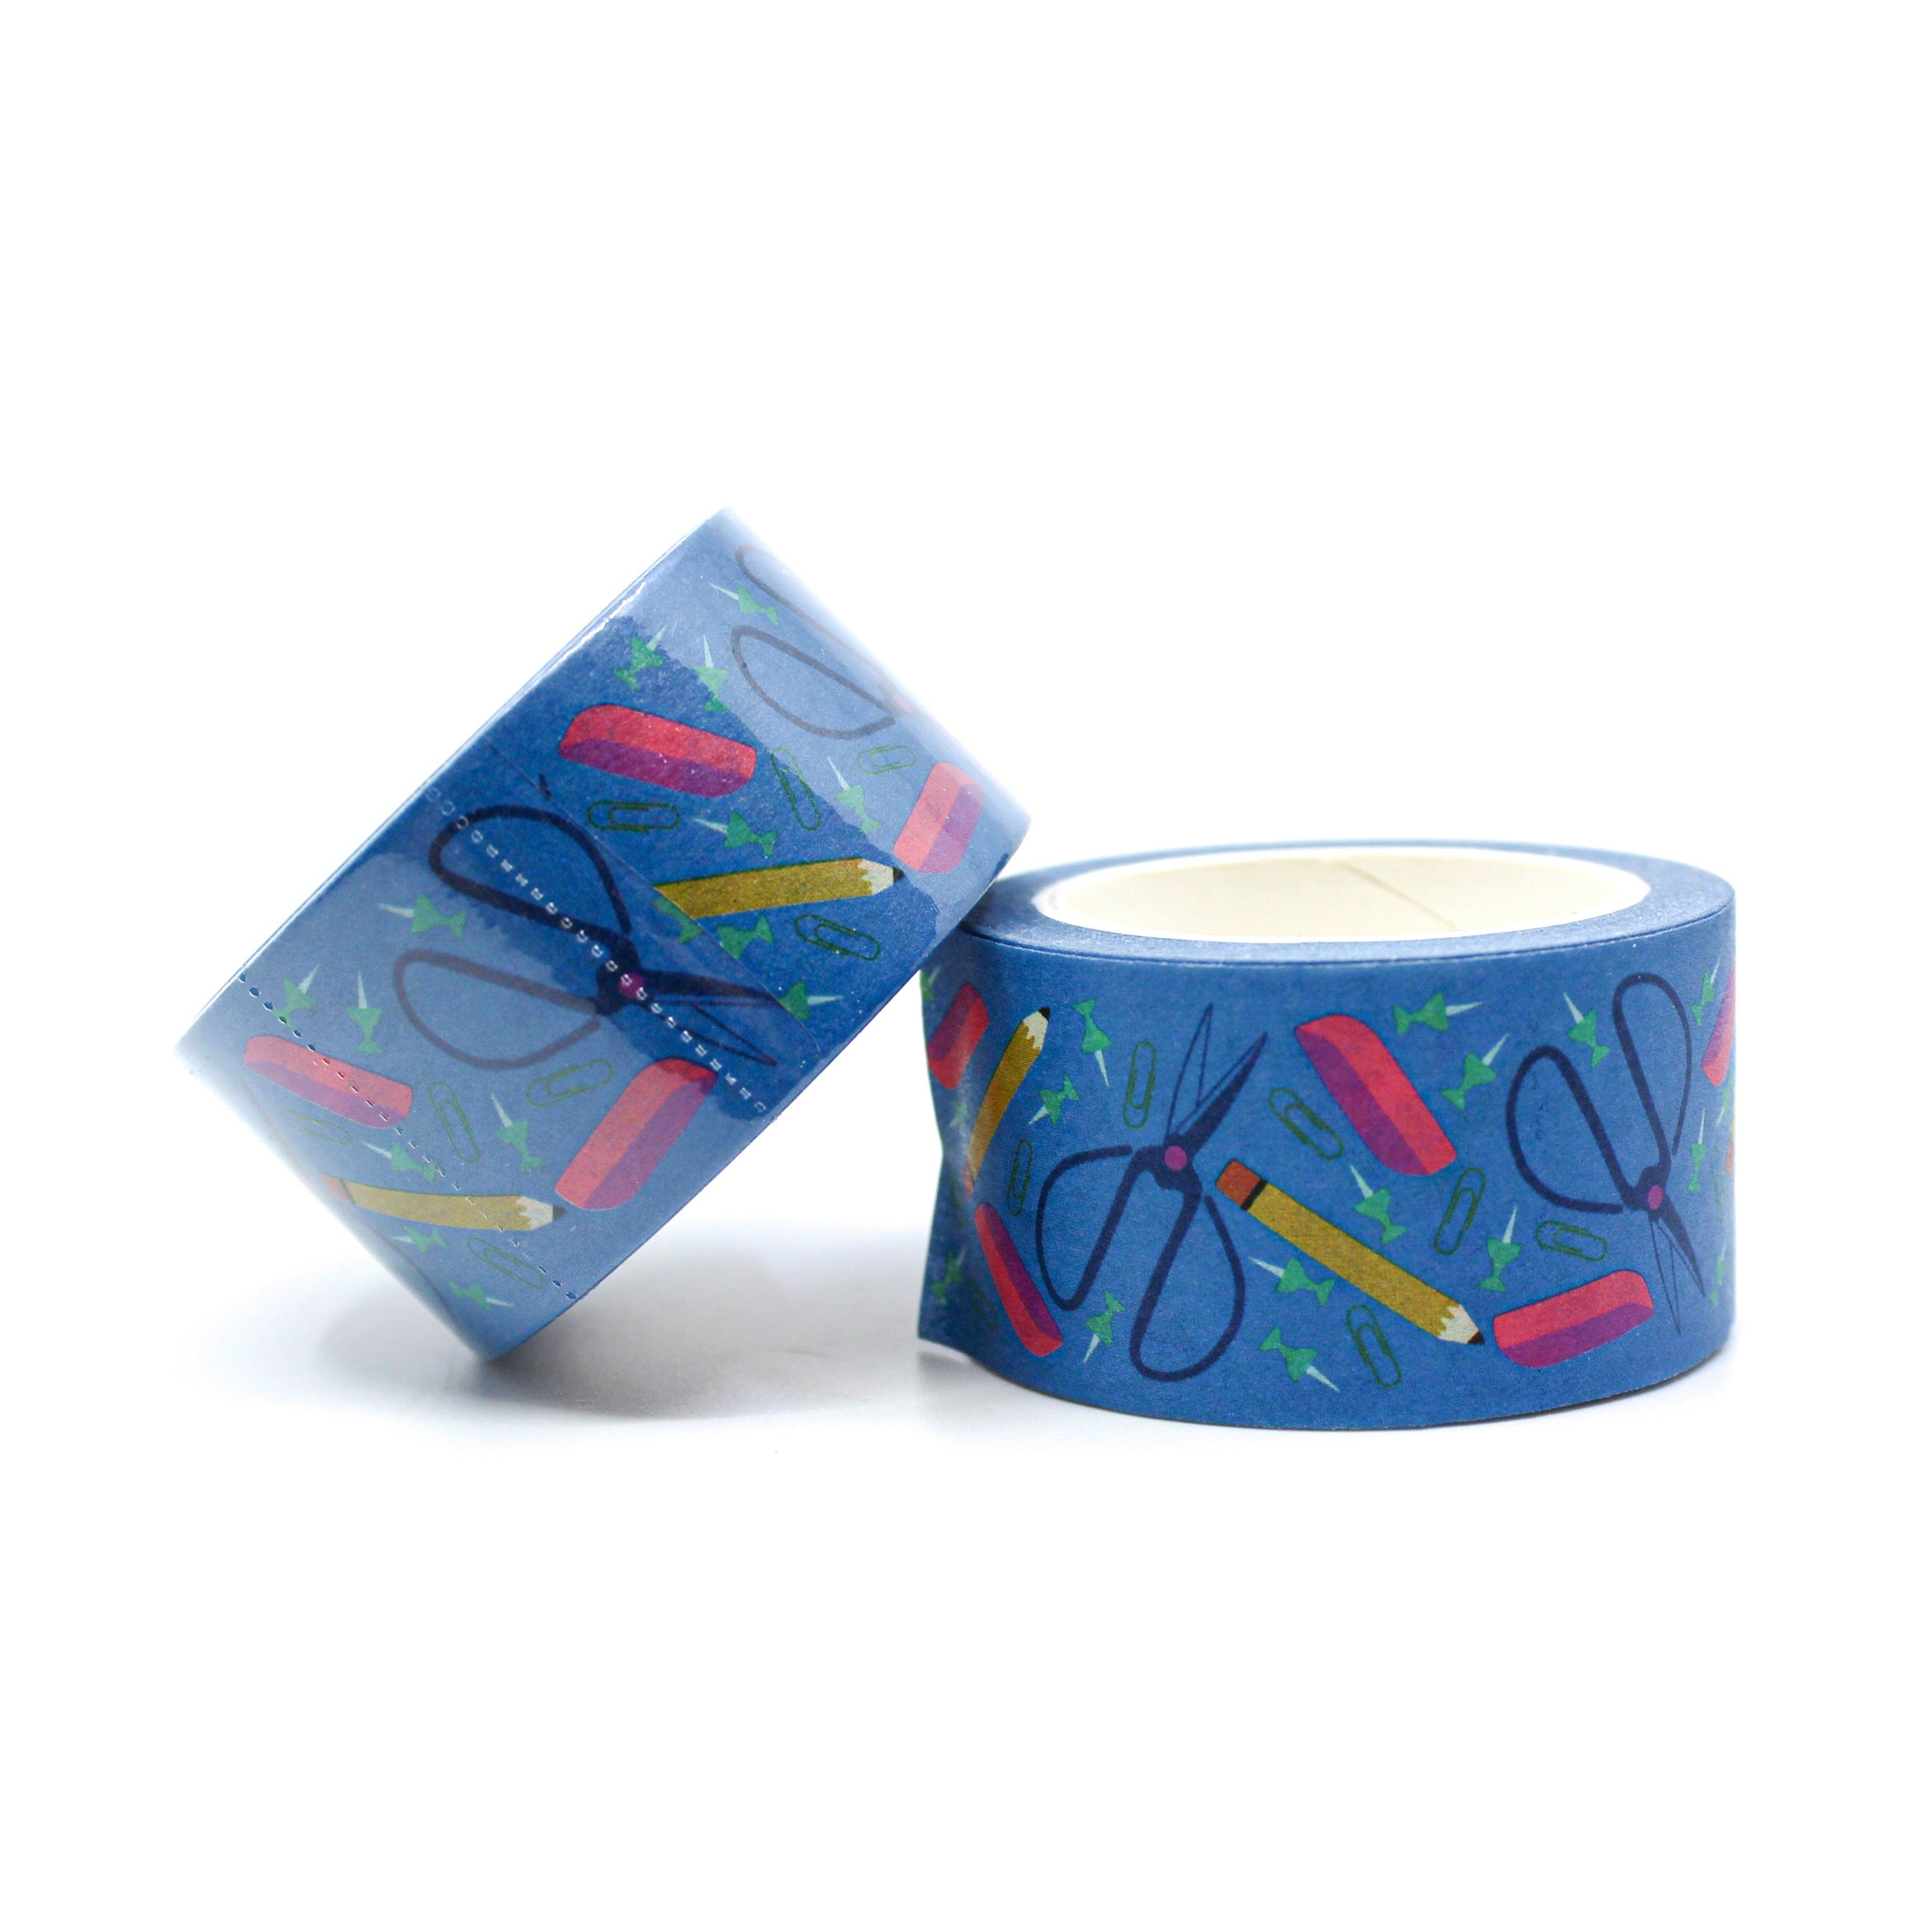 This is a roll of desk mess washi tapes from BBB Supplies Craft Shop